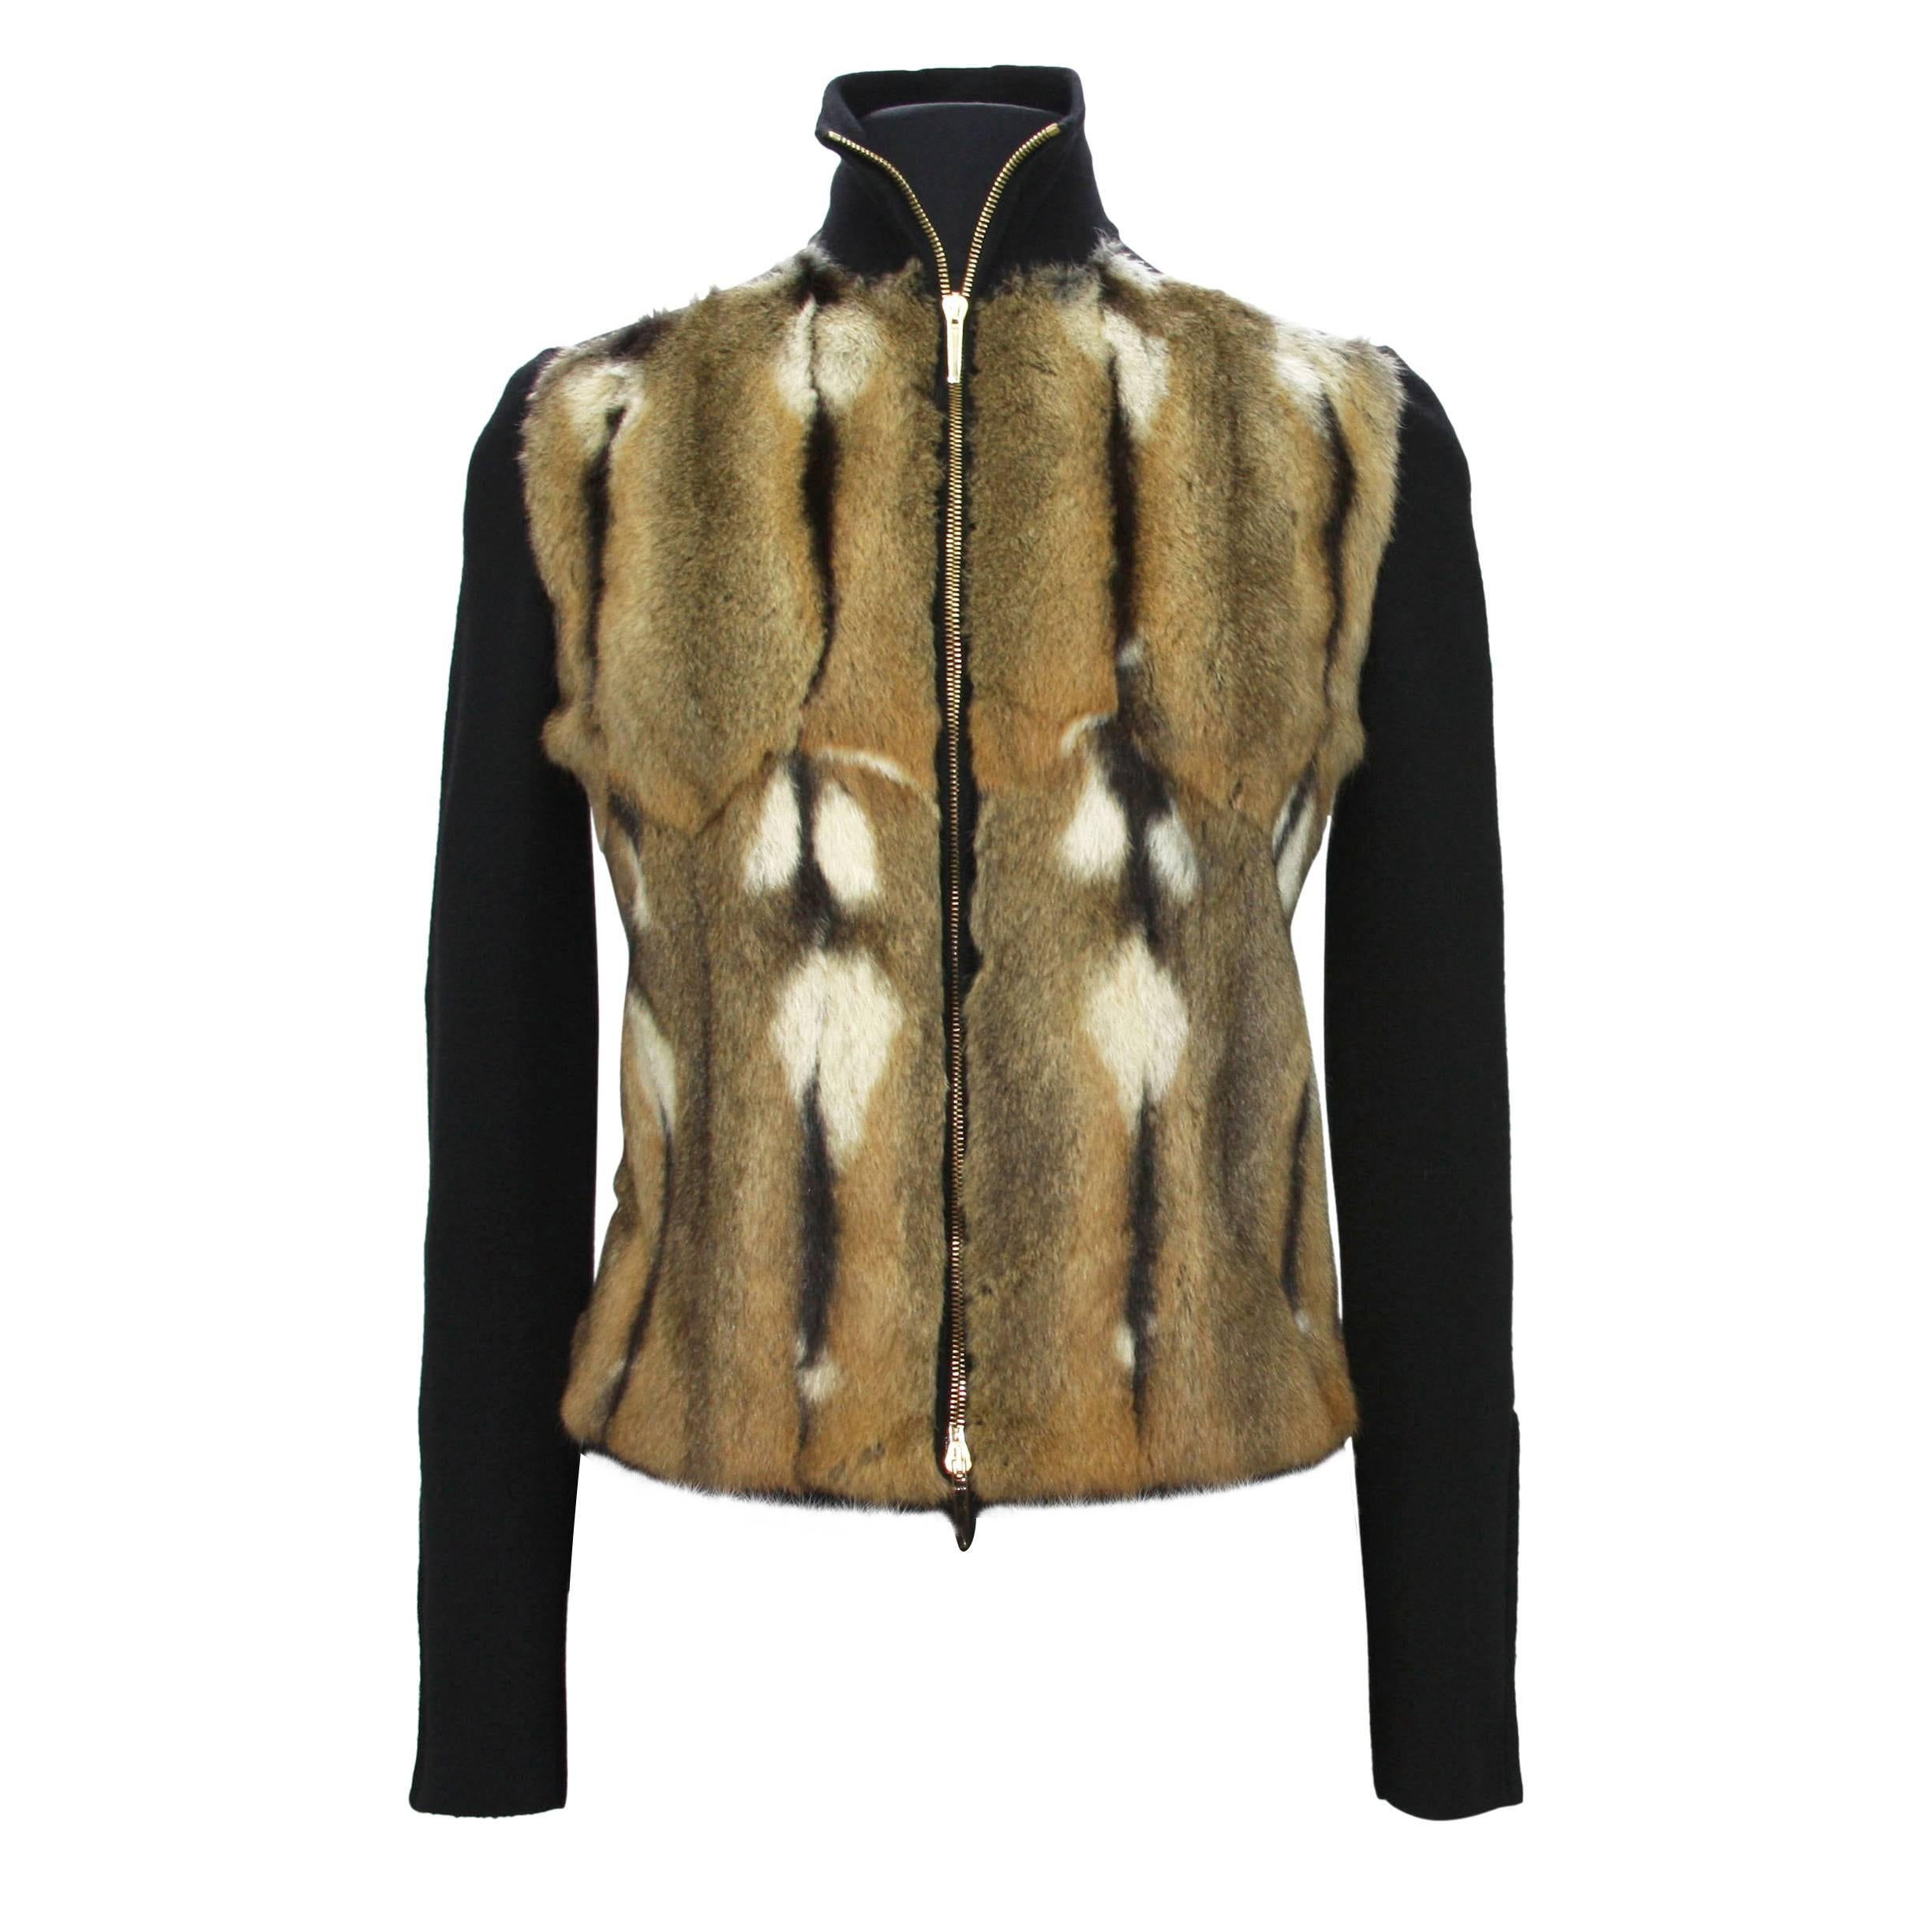 Tom Ford for Gucci Fur Wool Silk Cashmere Sweater Jacket S